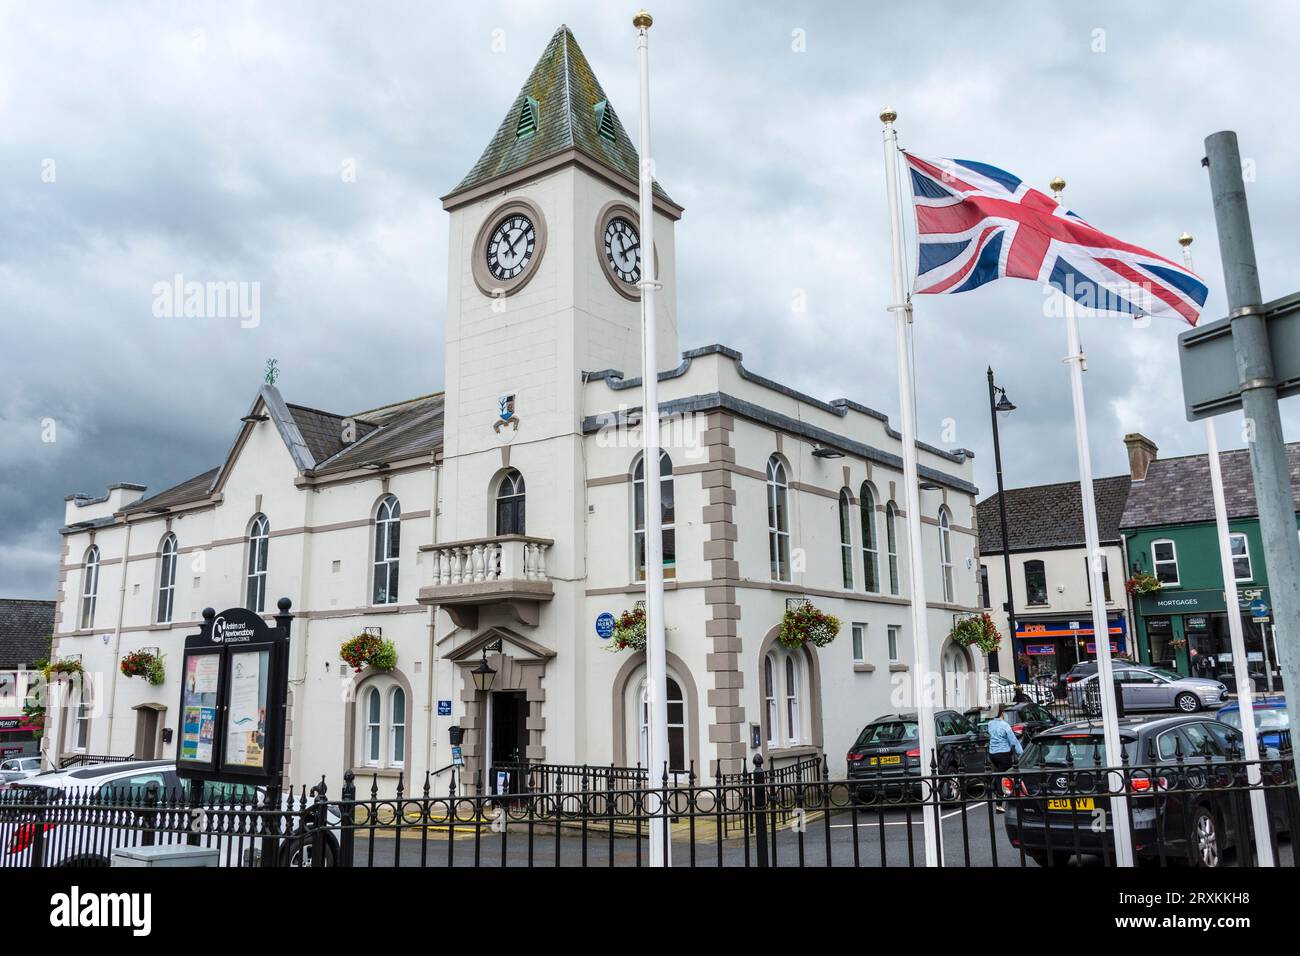 Town Hall in Ballyclare, County Antrim, Northern Ireland. Stock Photo